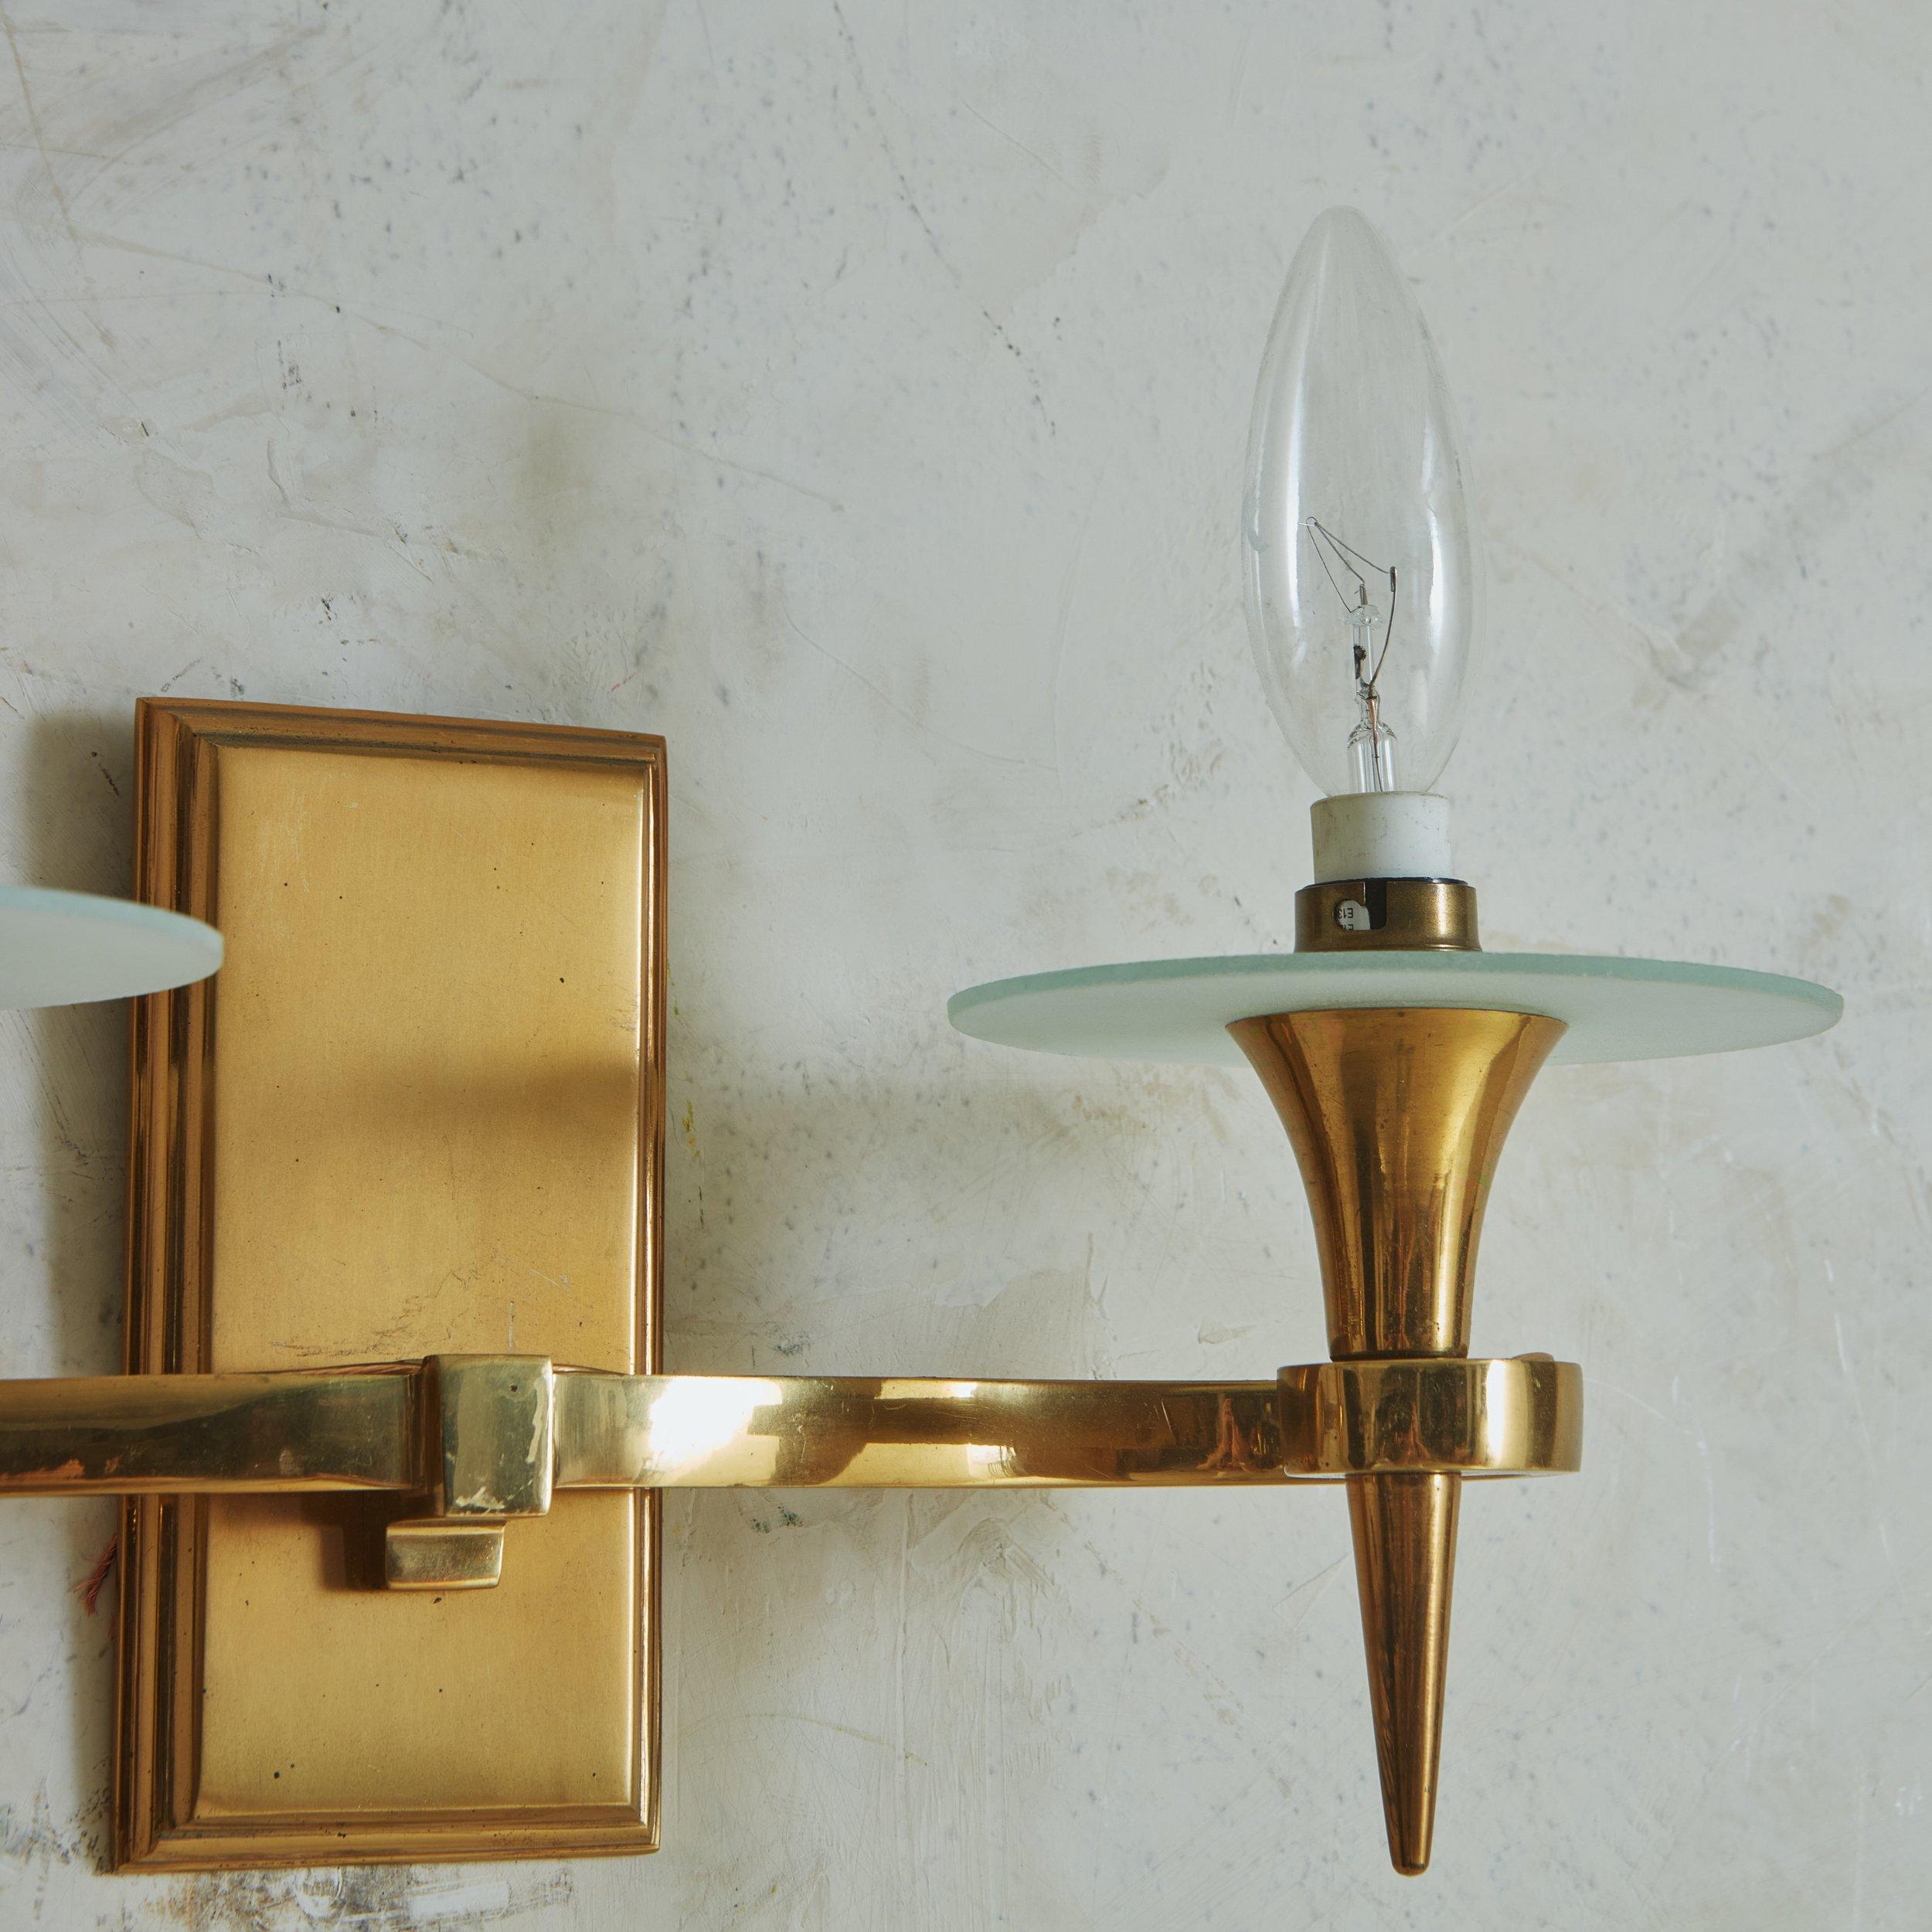 Mid-20th Century Pair of Brass Torch Sconces with Shades, France 1940s For Sale